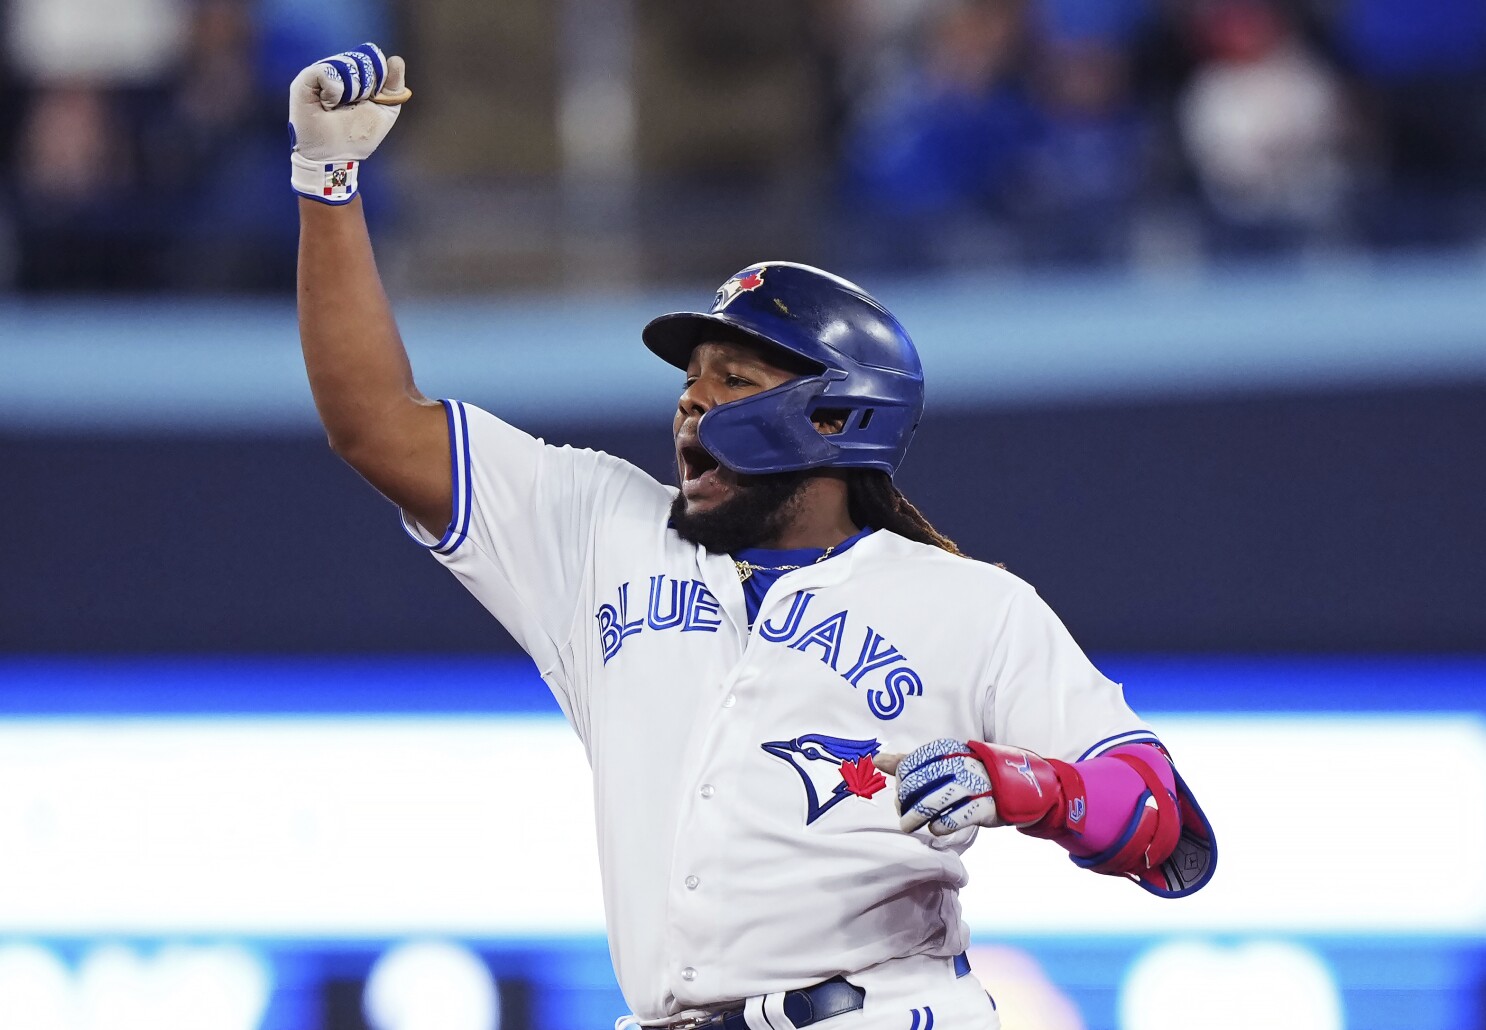 Blue Jays acquire two-time All-Star Merrifield from Royals for